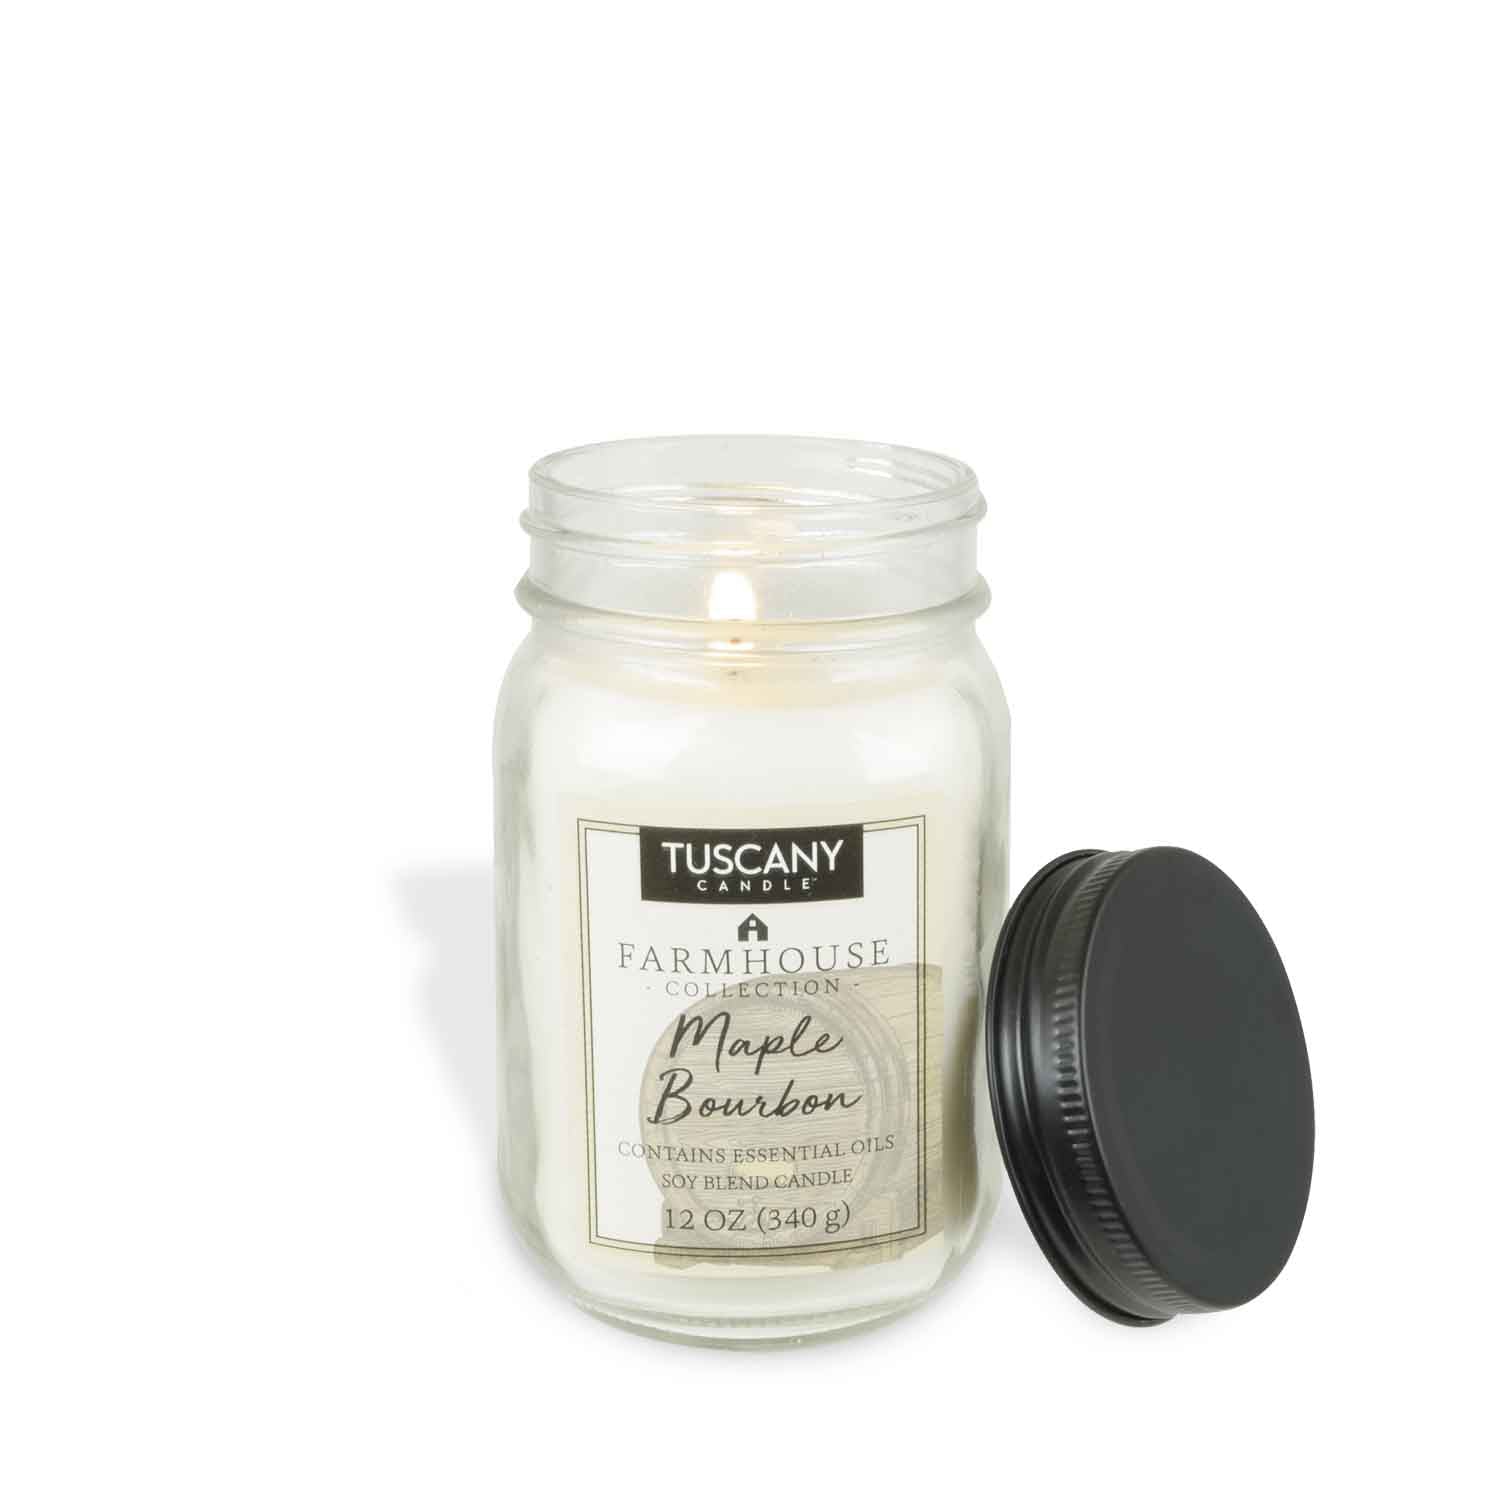 A Tuscany Candle® EVD Maple Bourbon Scented Jar Candle (12 oz) from the Farmhouse Collection, with a lid, exuding a rustic candle ambiance, featuring the warm glow of a Maple Bourbon candle.